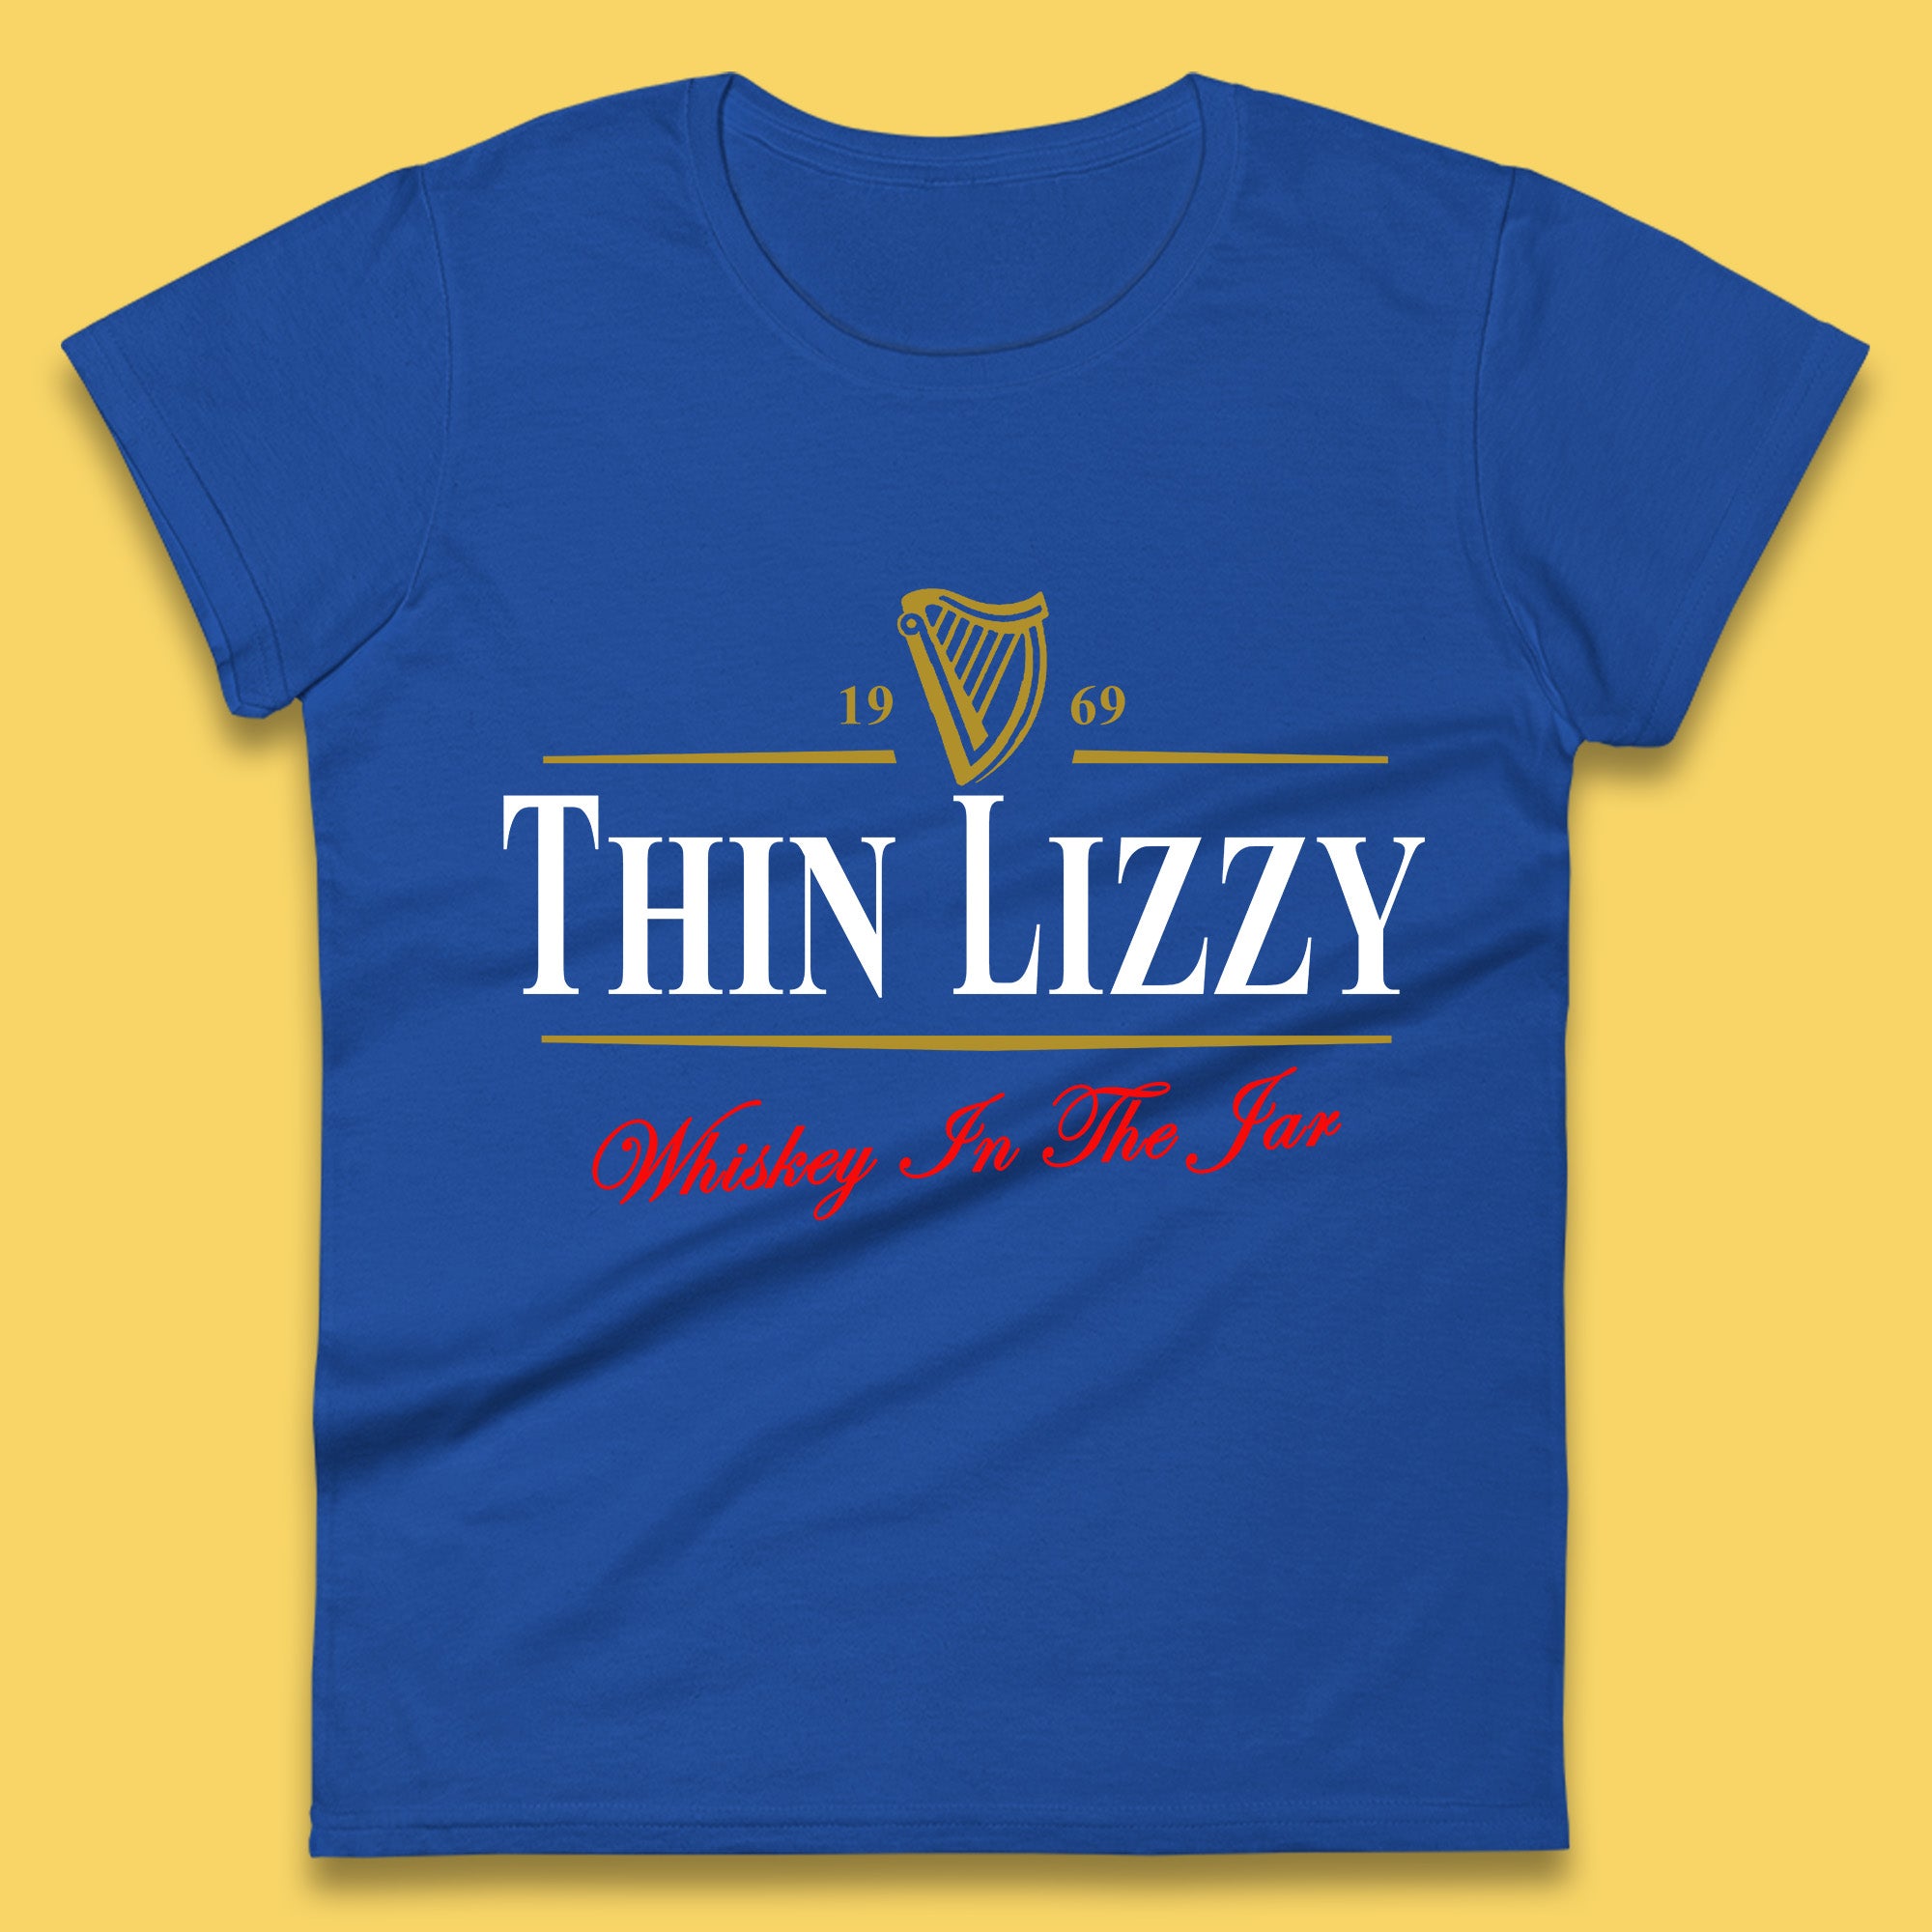 Thin Lizzy Irish Hard Rock Band Whiskey In The Jar Song By Thin Lizzy Irish Traditional Song Womens Tee Top